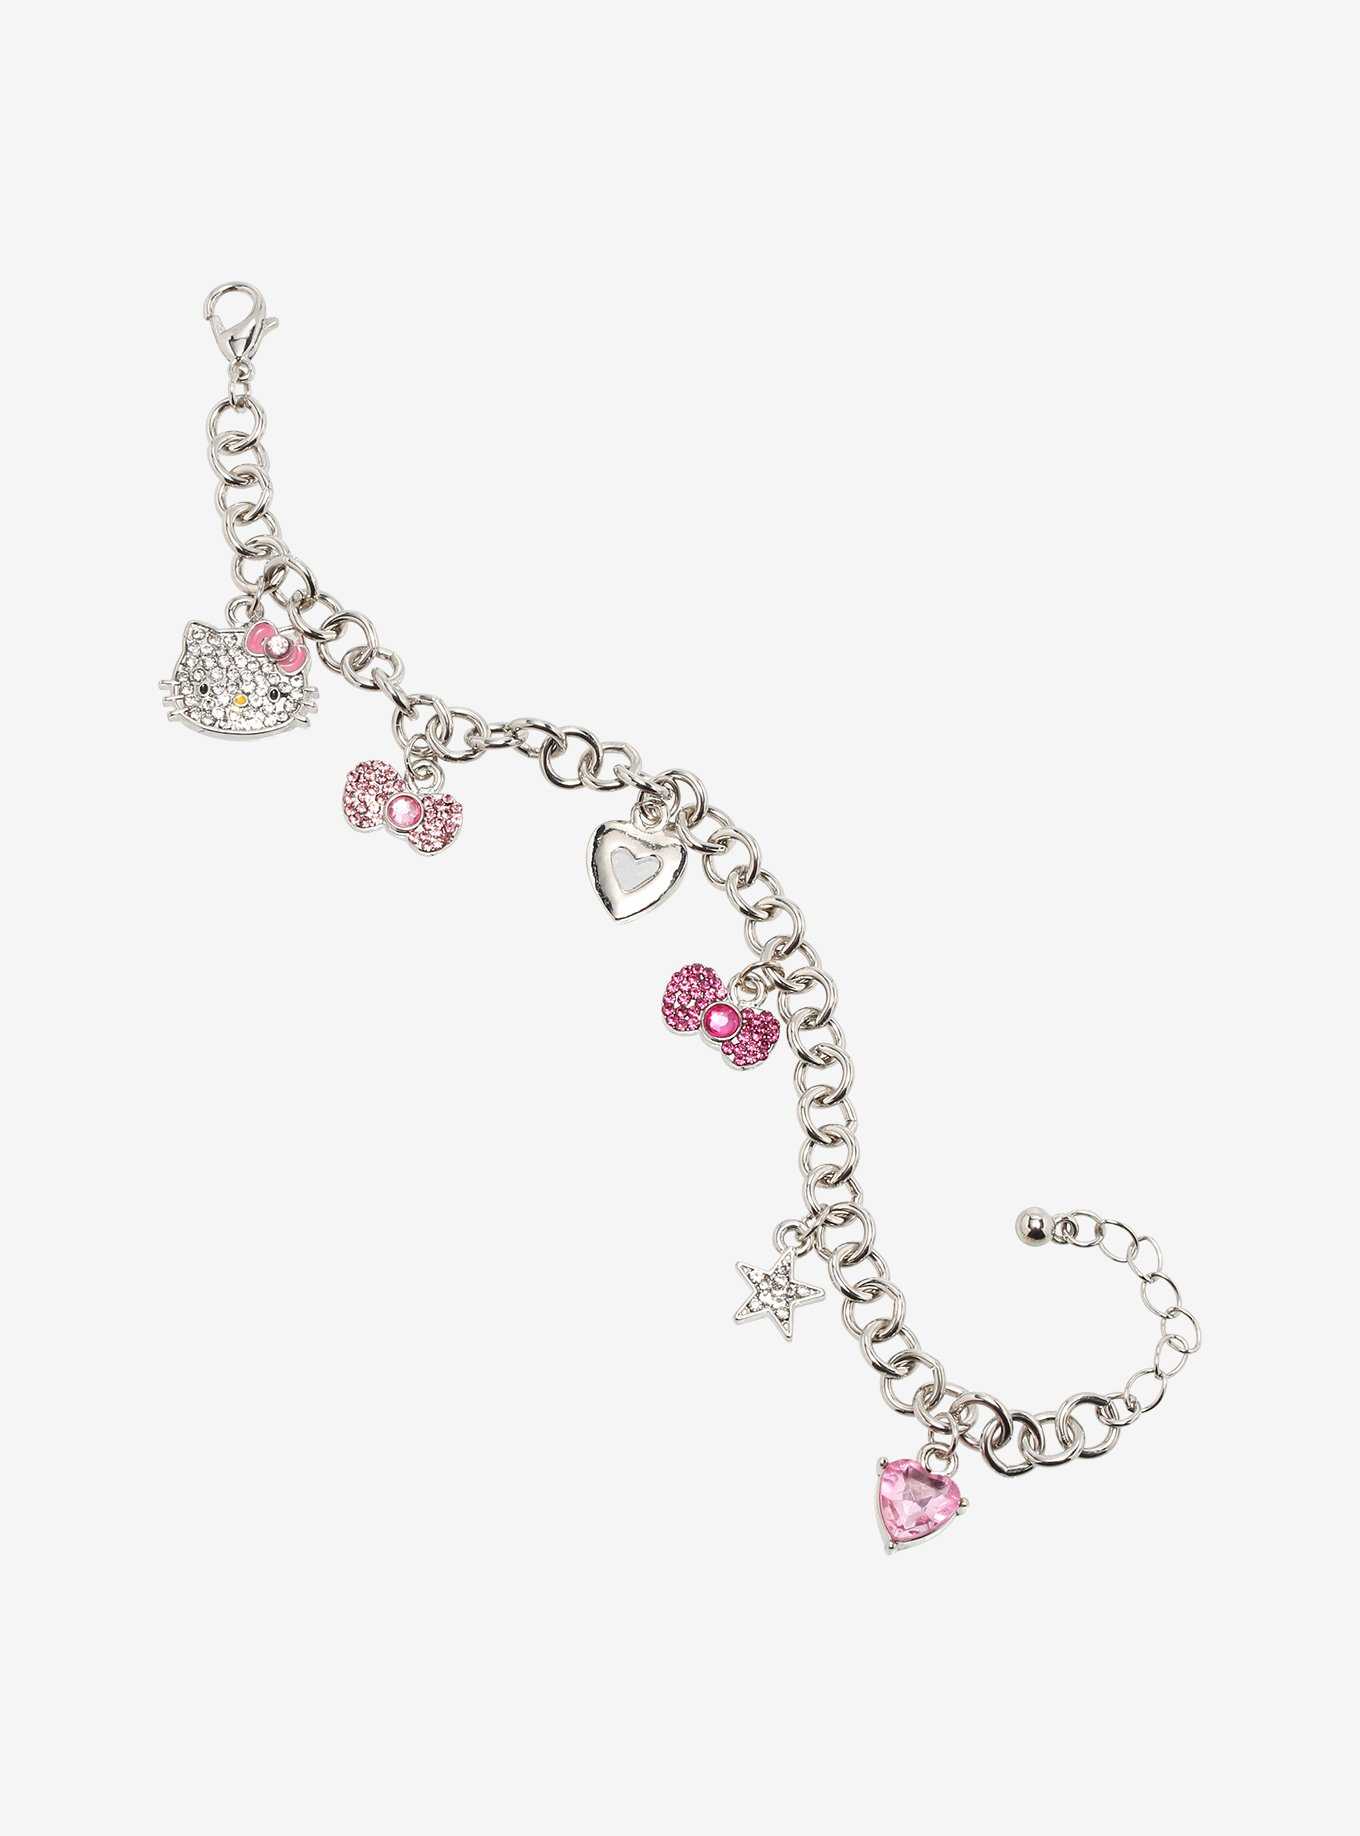 HELLO KITTY CHARM BRACELET PINK BEADS & BOW SHIMMERING SUPER CUTE!!